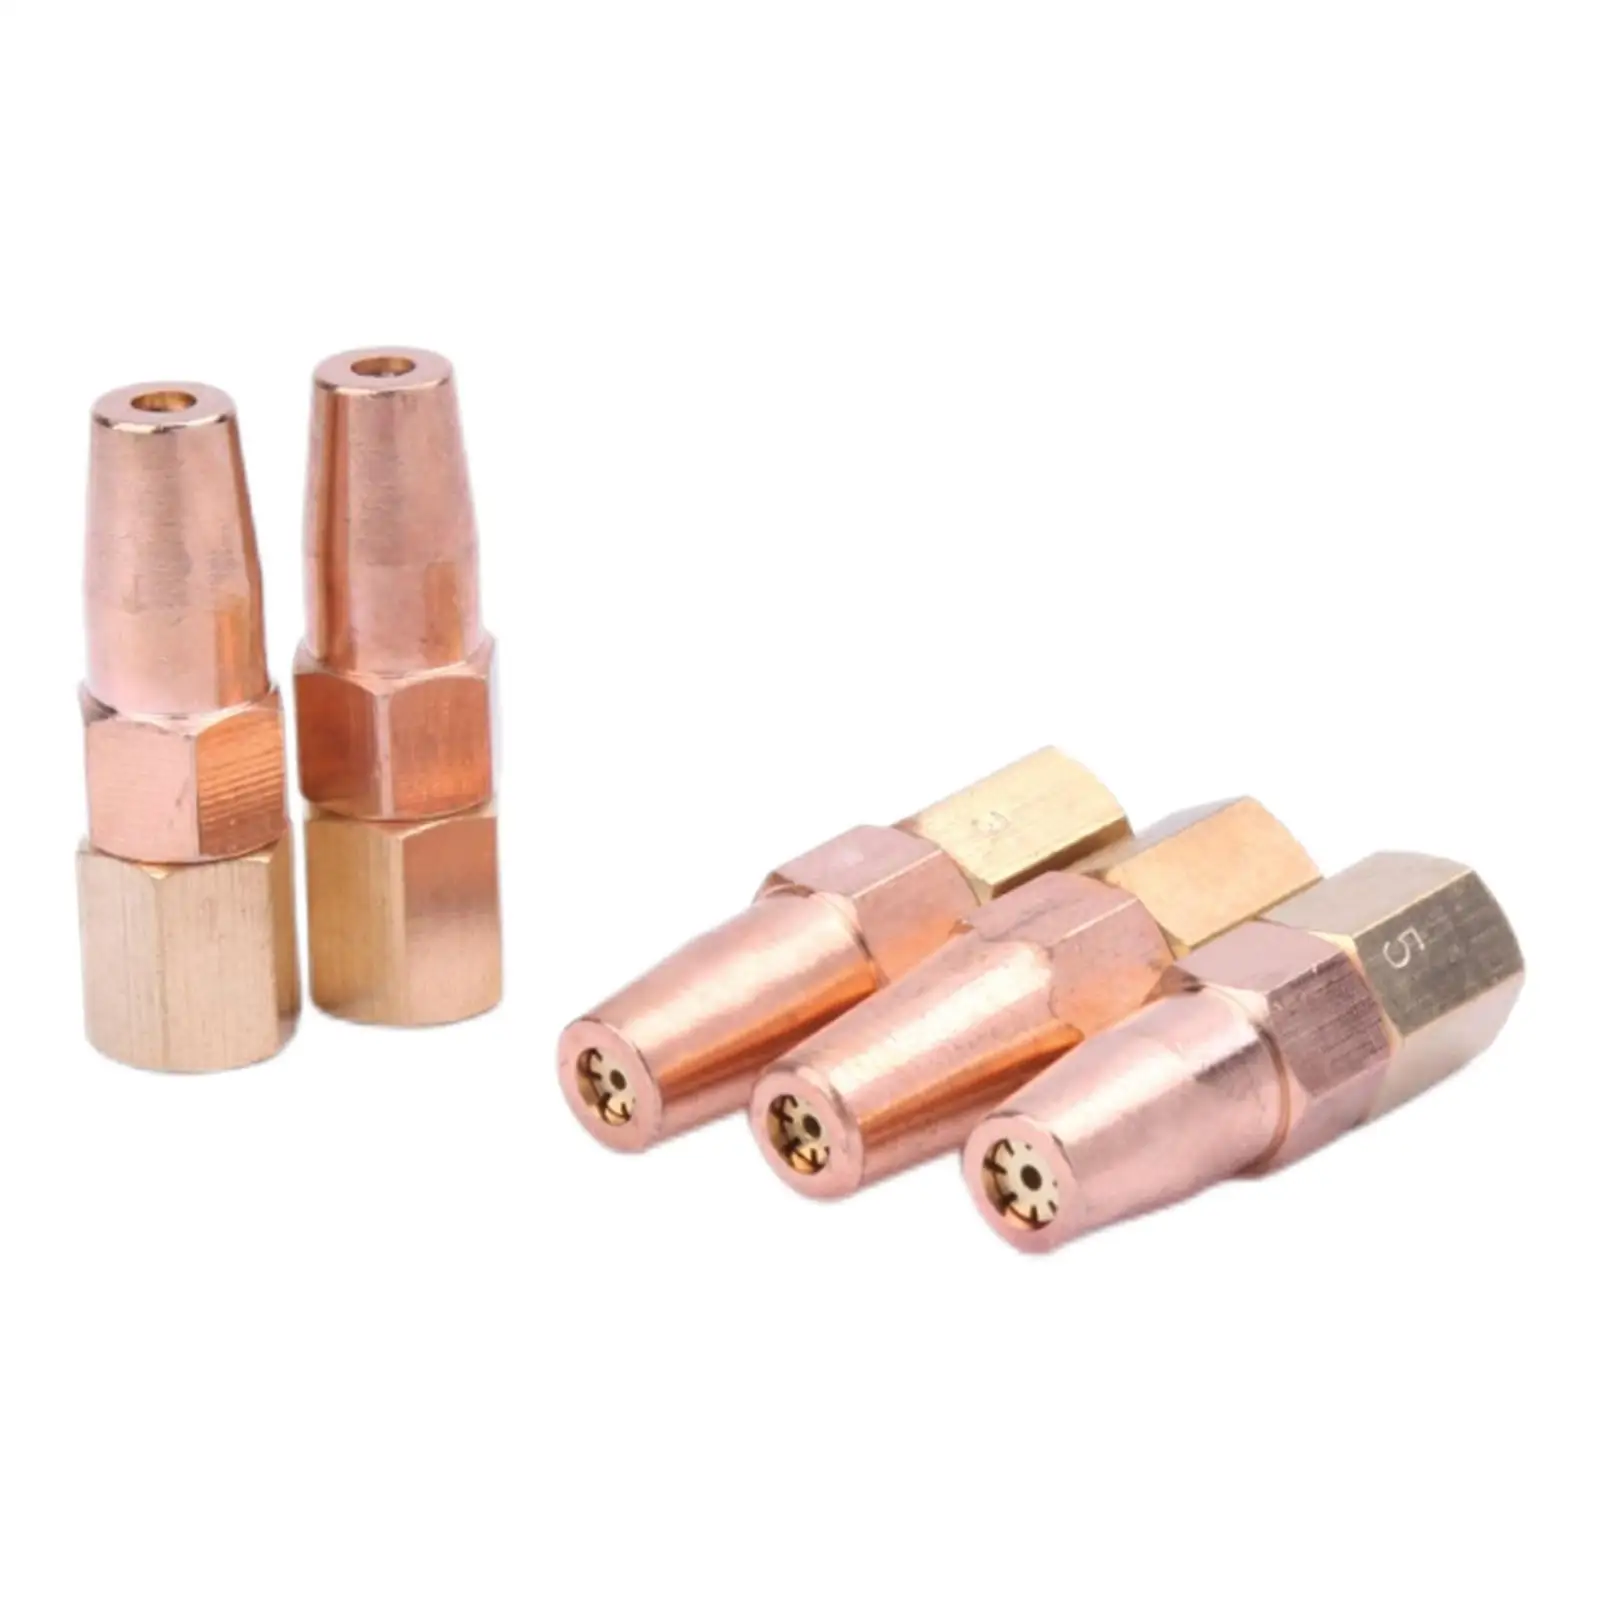 5Pieces Propane Gas Welding Nozzle H01-6 Oxygen Gas Contact Tips Holder Gas Nozzle for Heat Treating Straightening Metal Bending